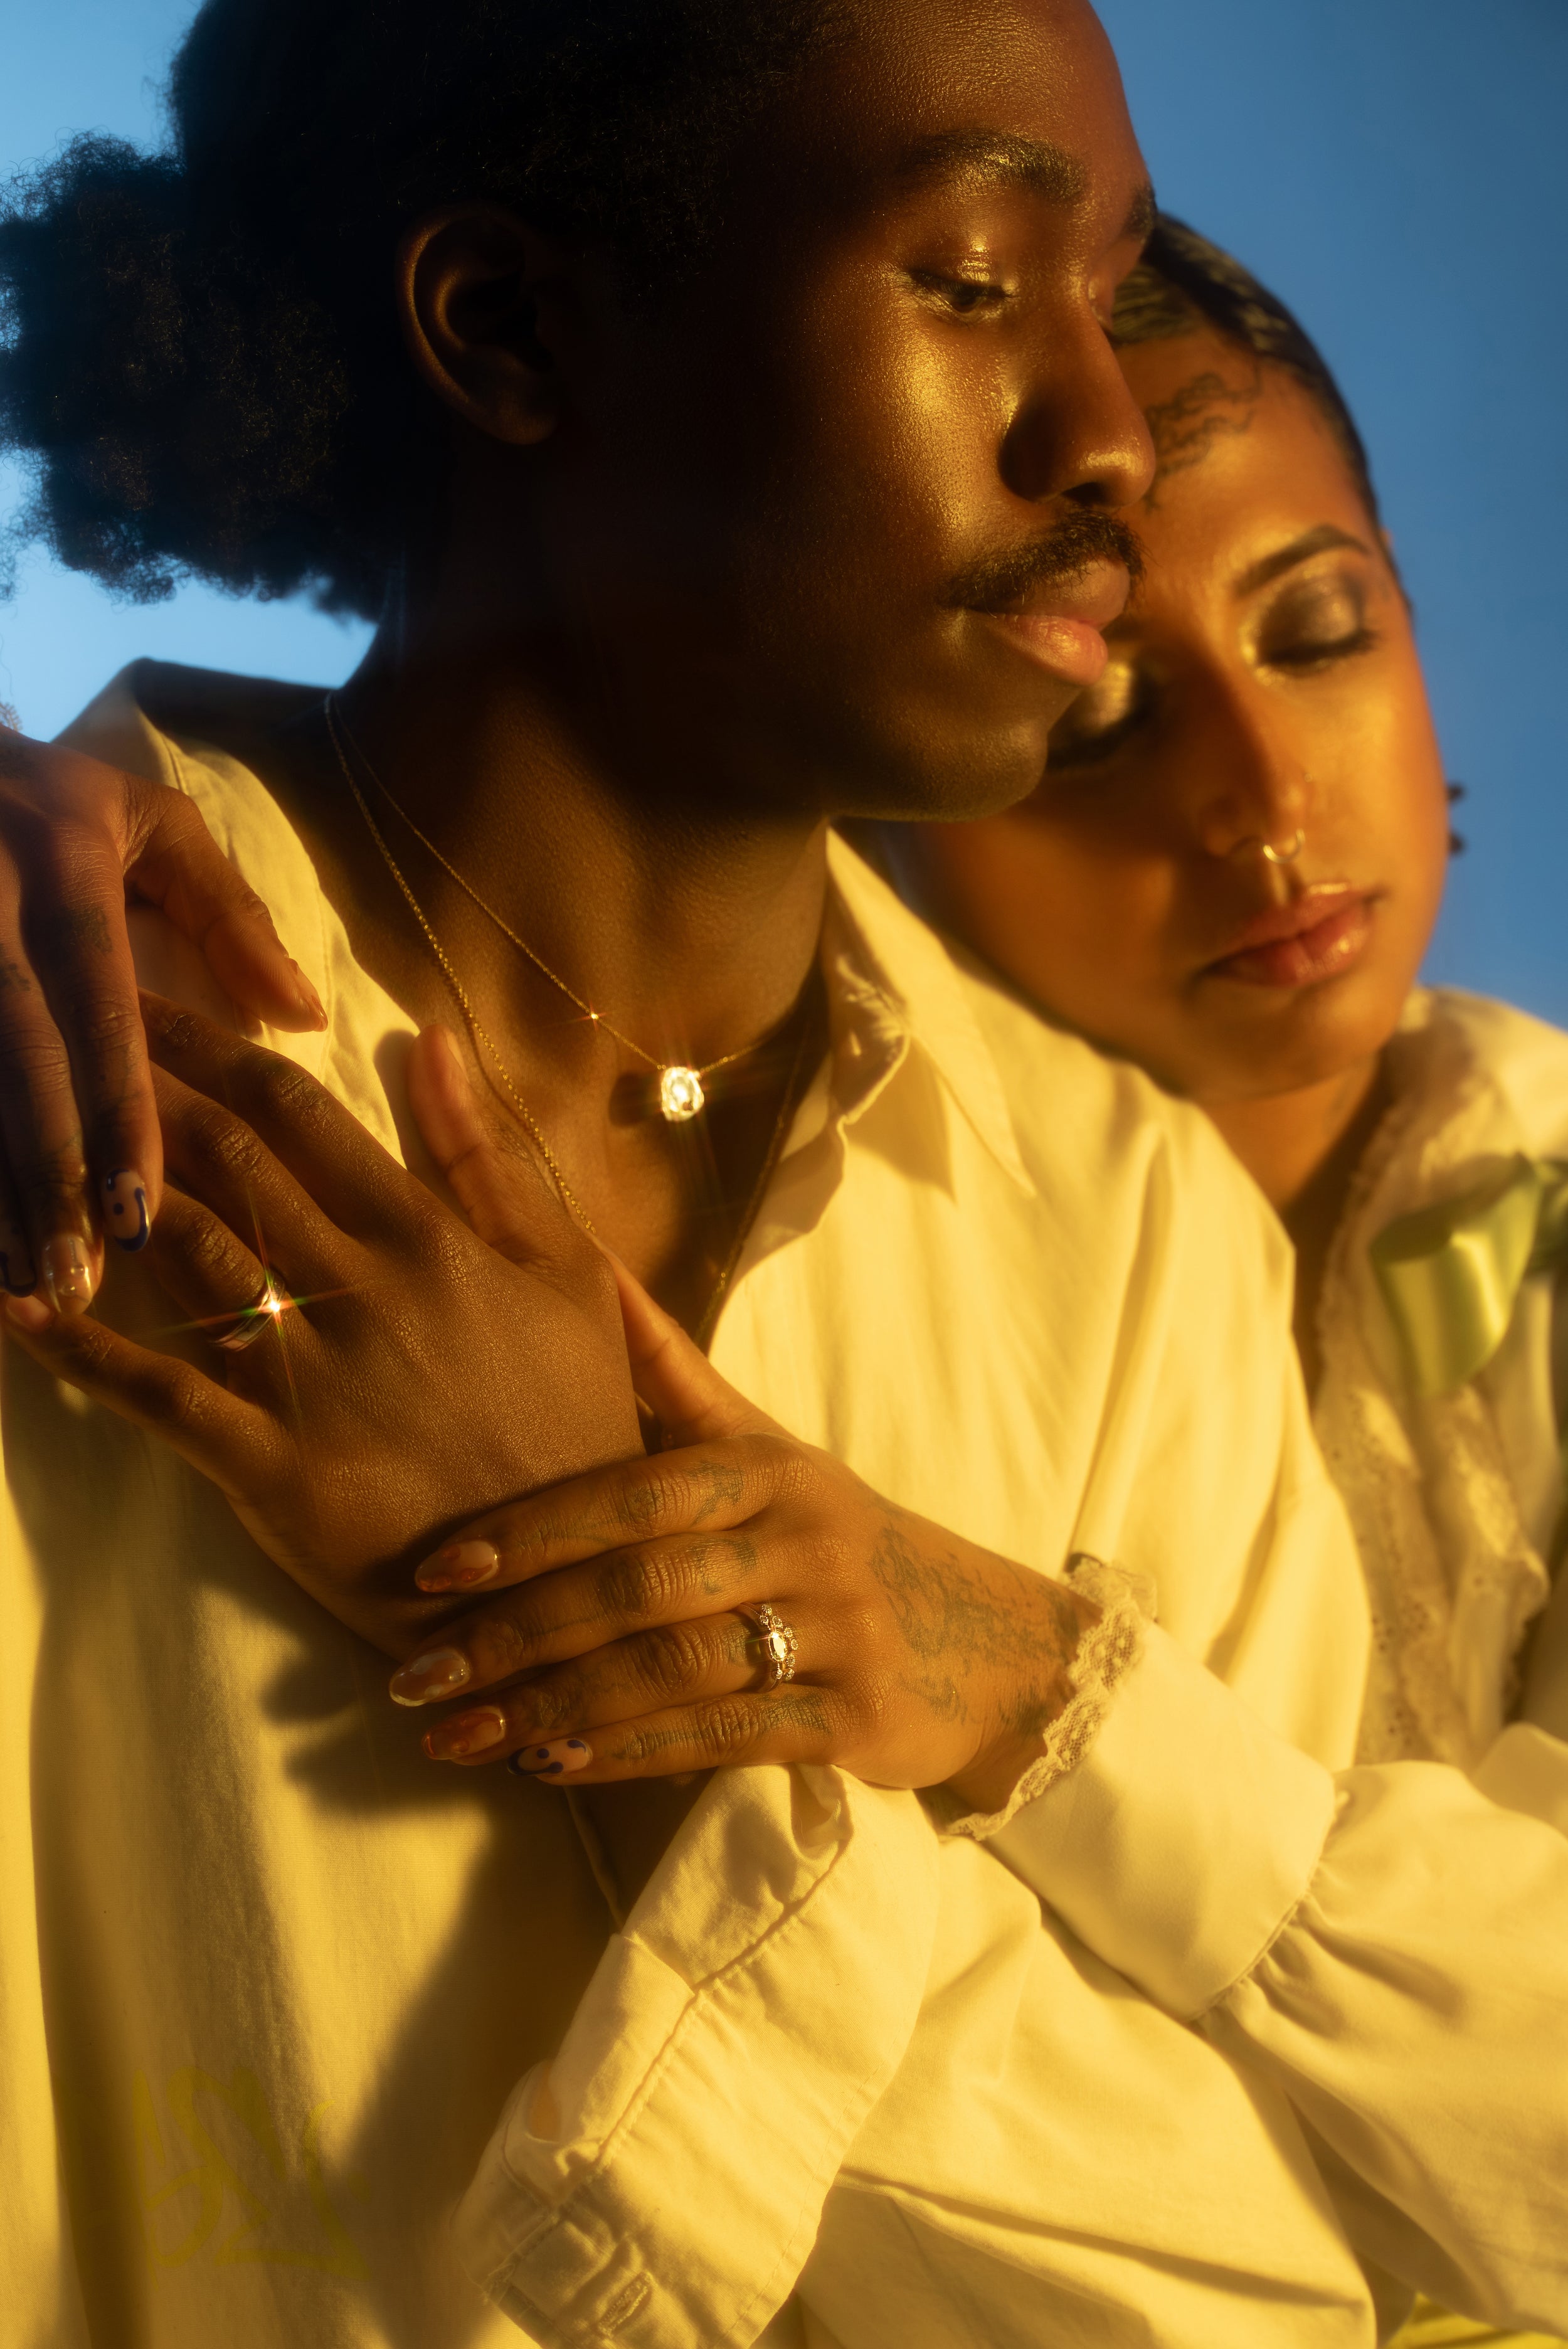 Models embrace hands while showing new fine jewelry featured in our in This Moment lookbook